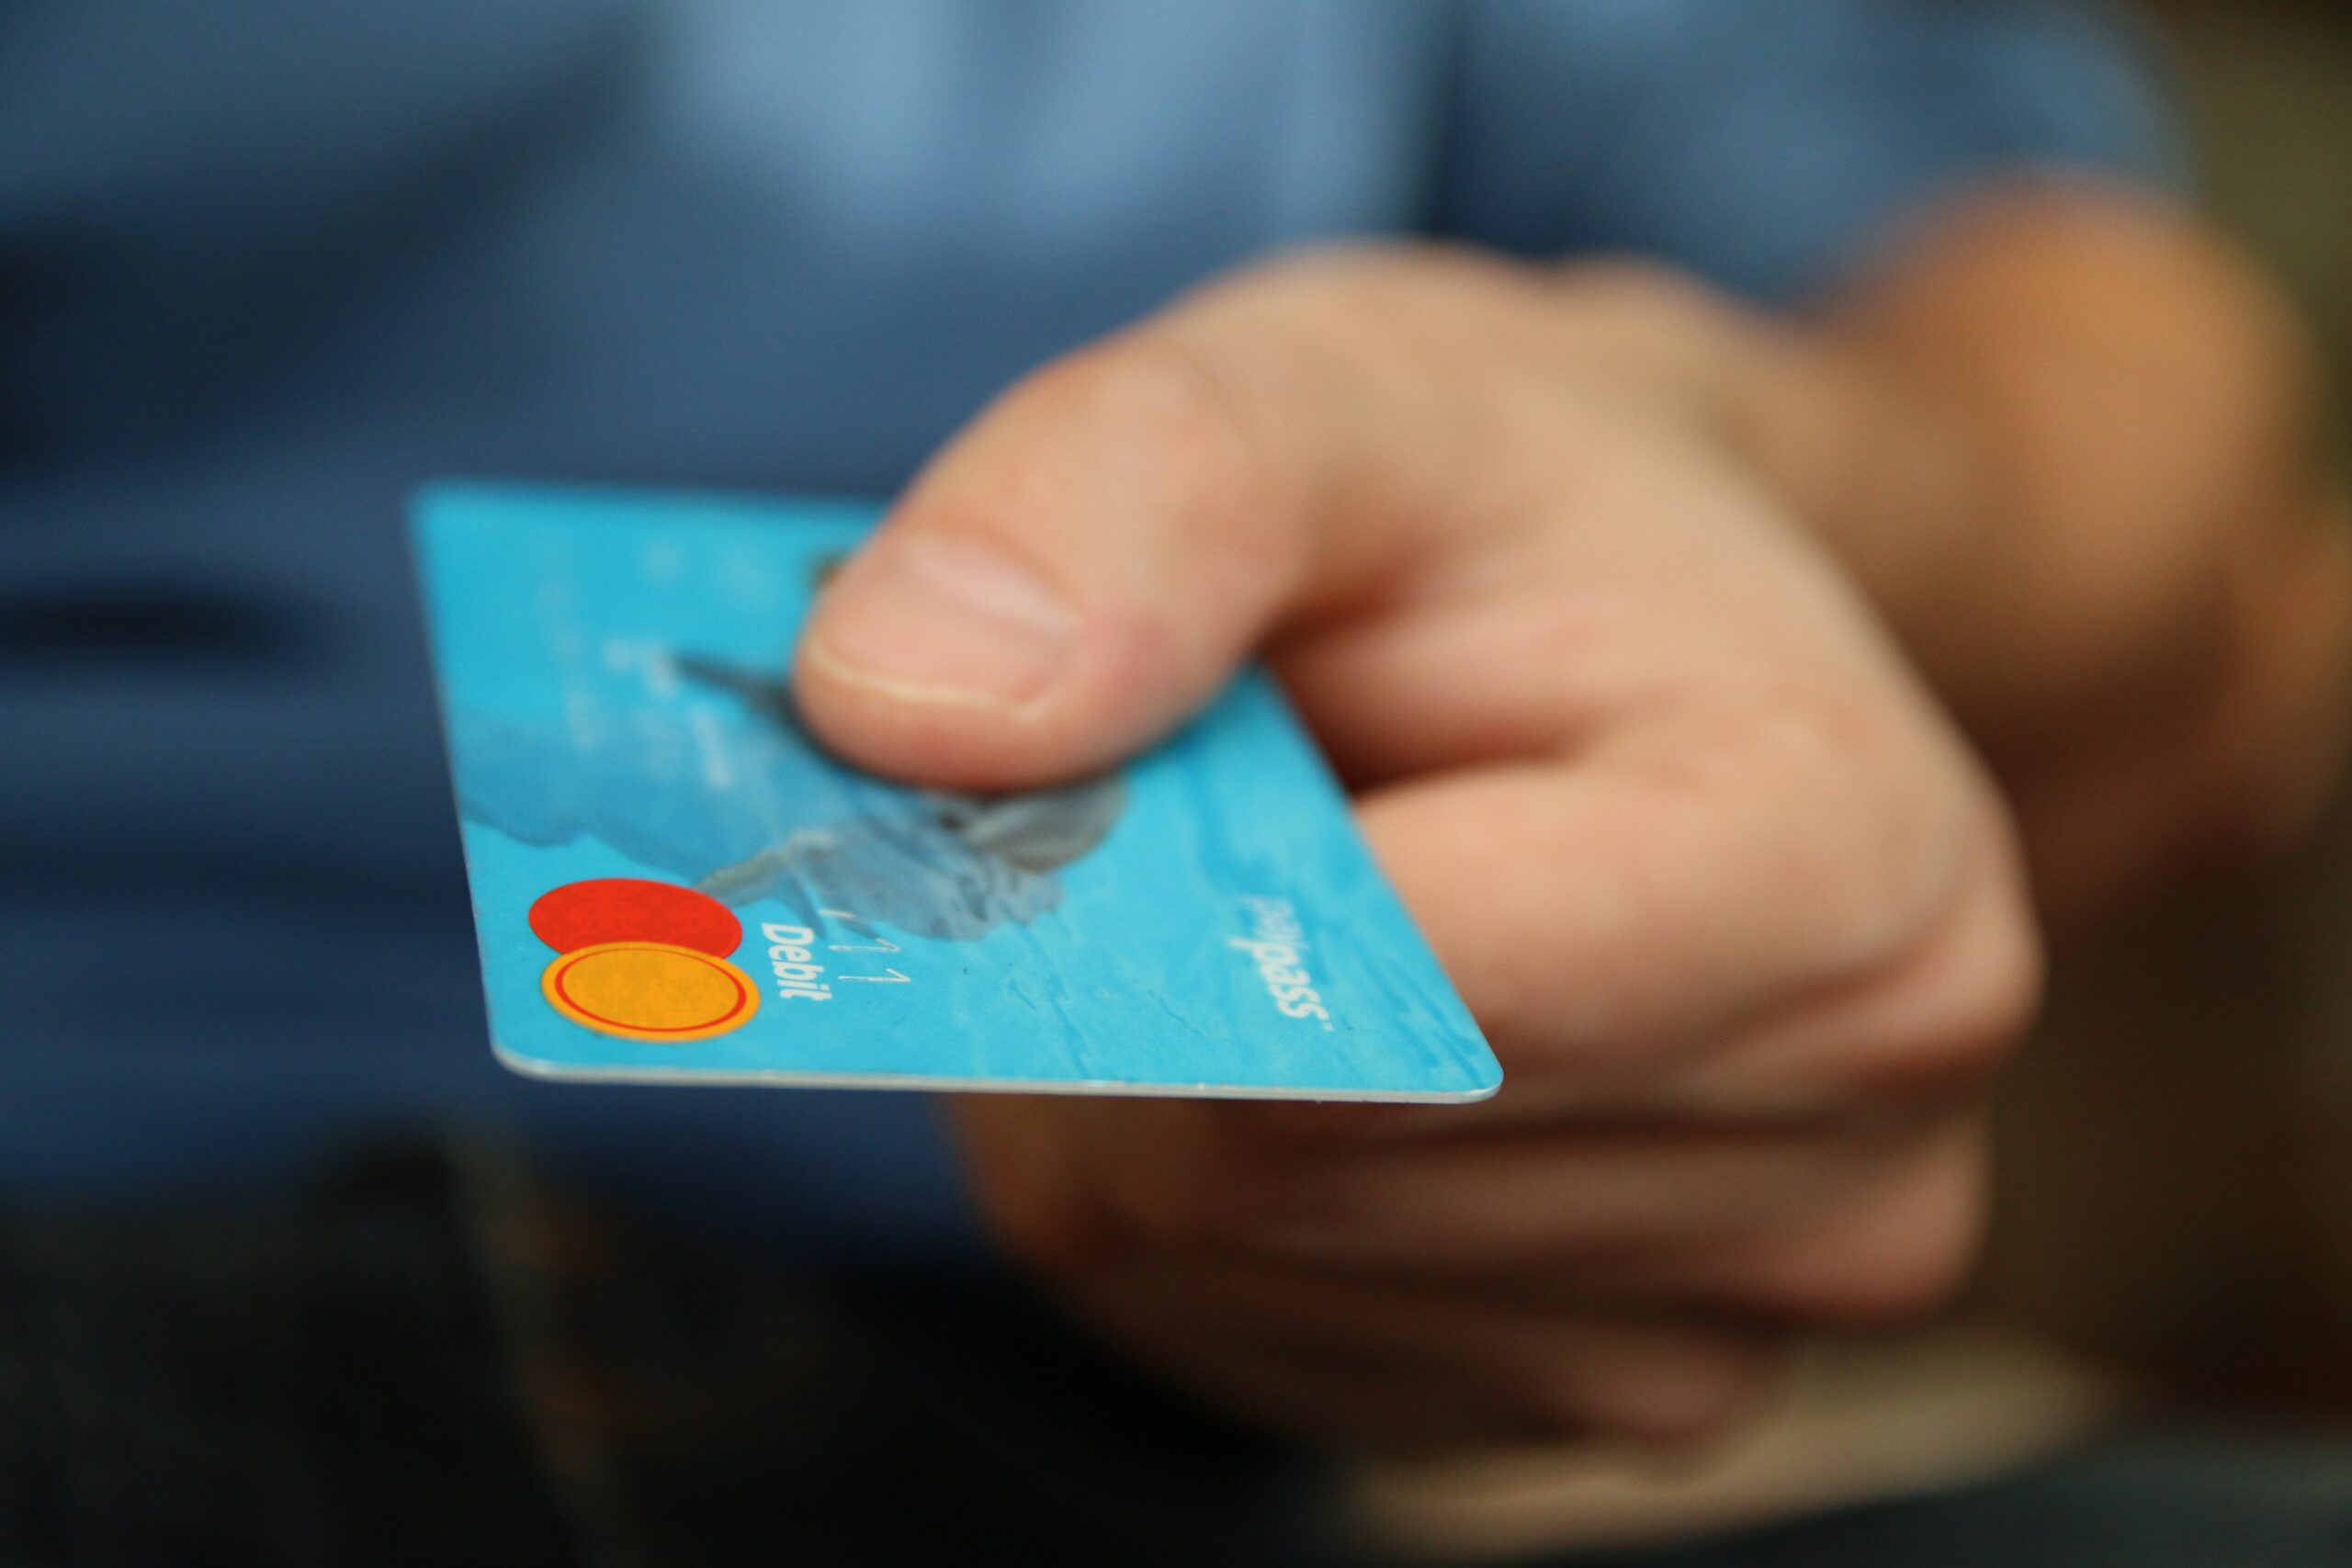 Person holding a plastic credit card